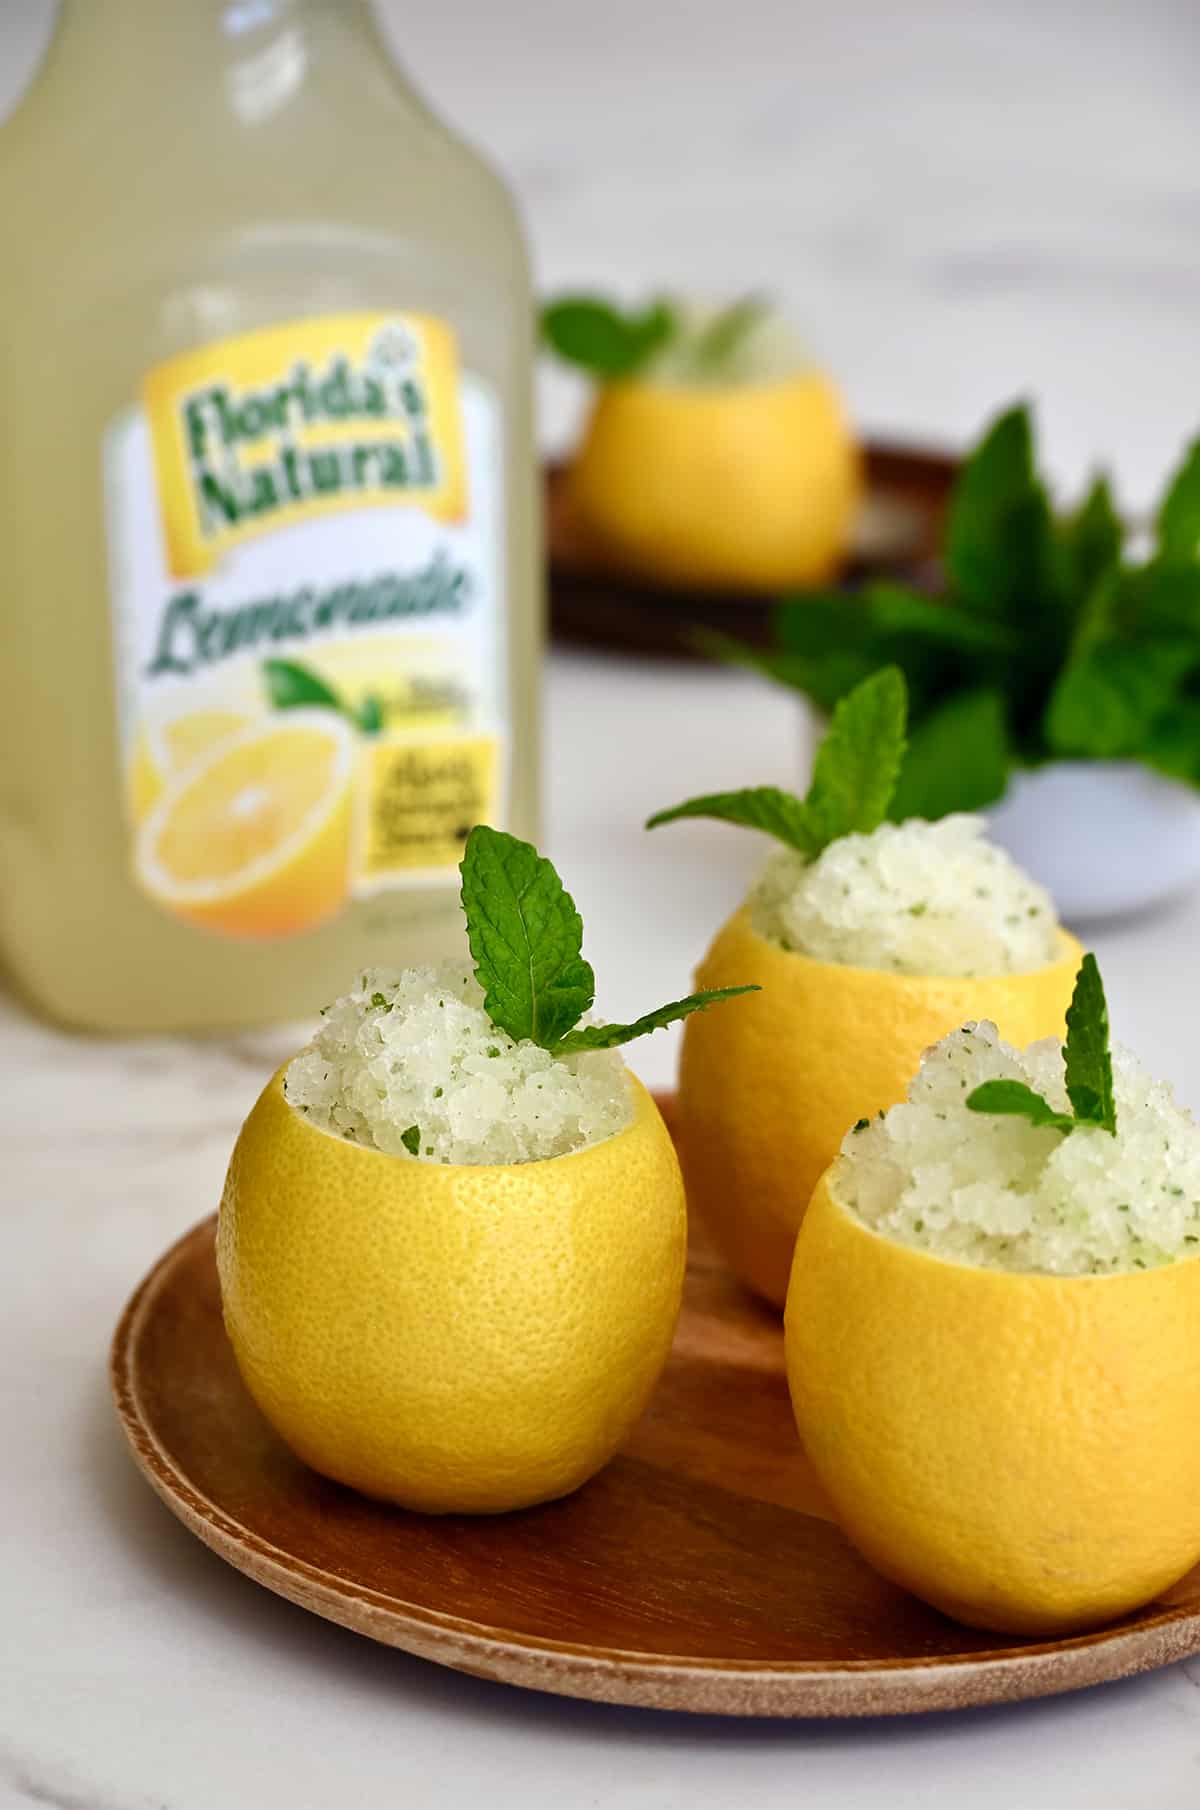 Three hollowed out lemons filled with lemon granita on a wood plate in front of a carton of Florida's Natural Lemonade.